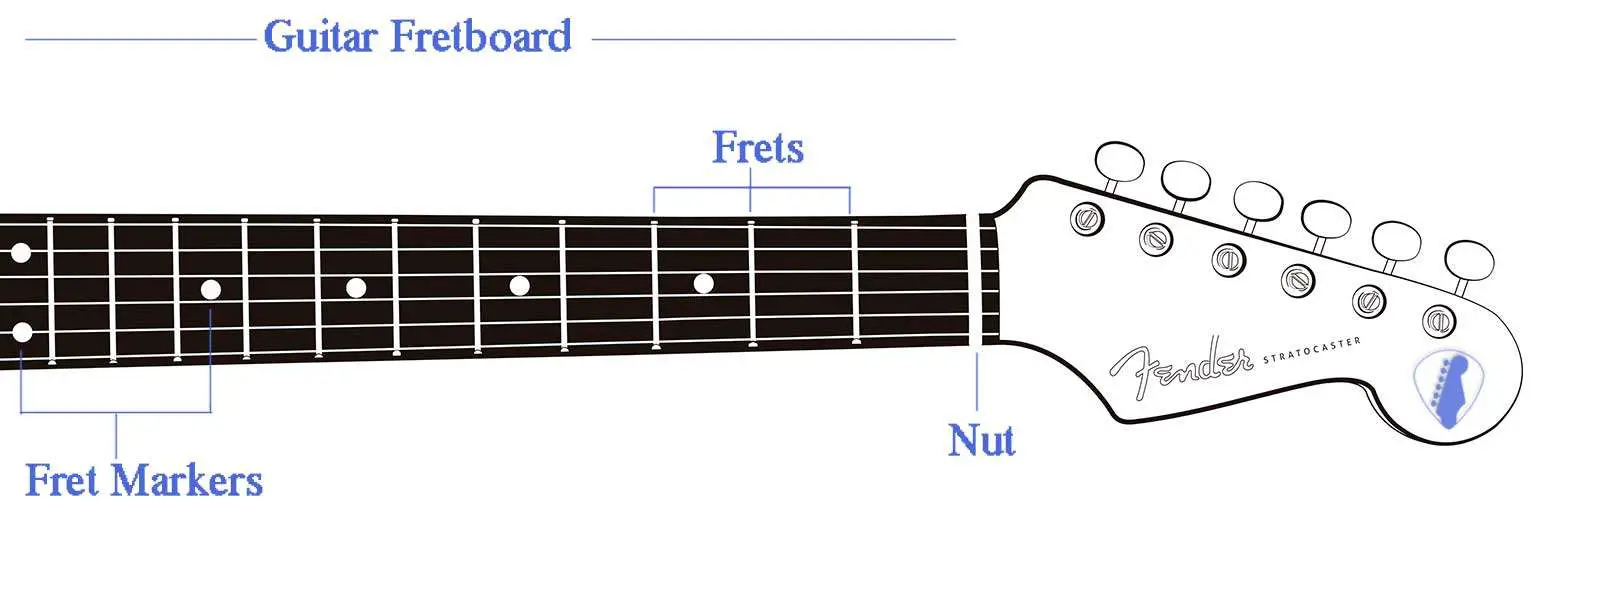 electric guitar bodies, truss rod, string vibrations, tone controls, volume and tone controls